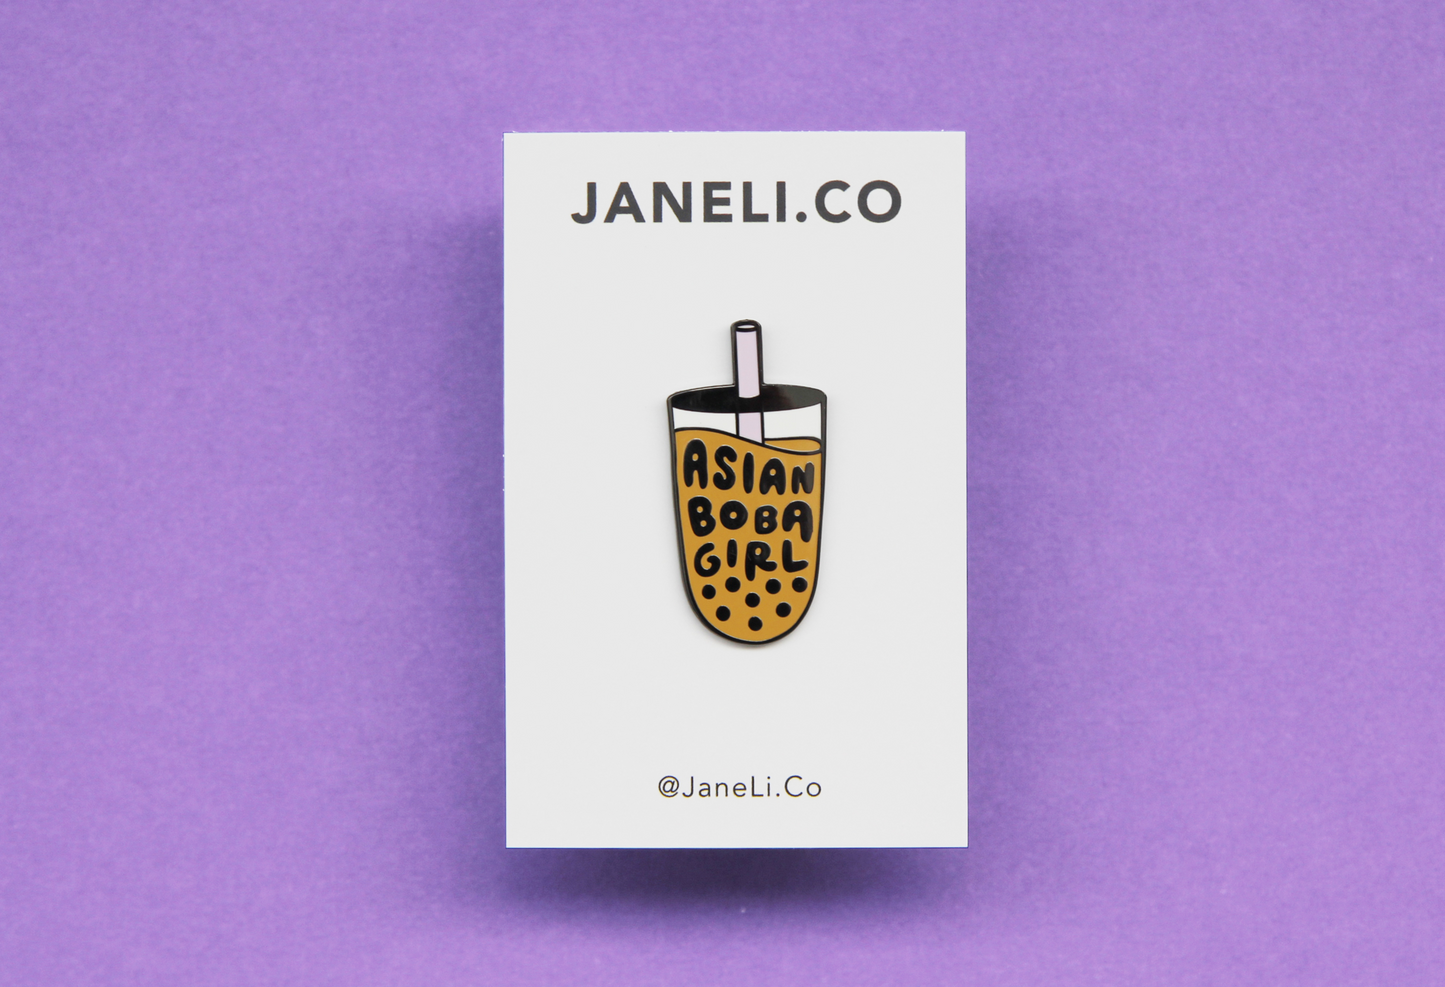 An enamel pin showing a mooncake with a bite out of it on a white JaneLi.Co backing card over a purple background.